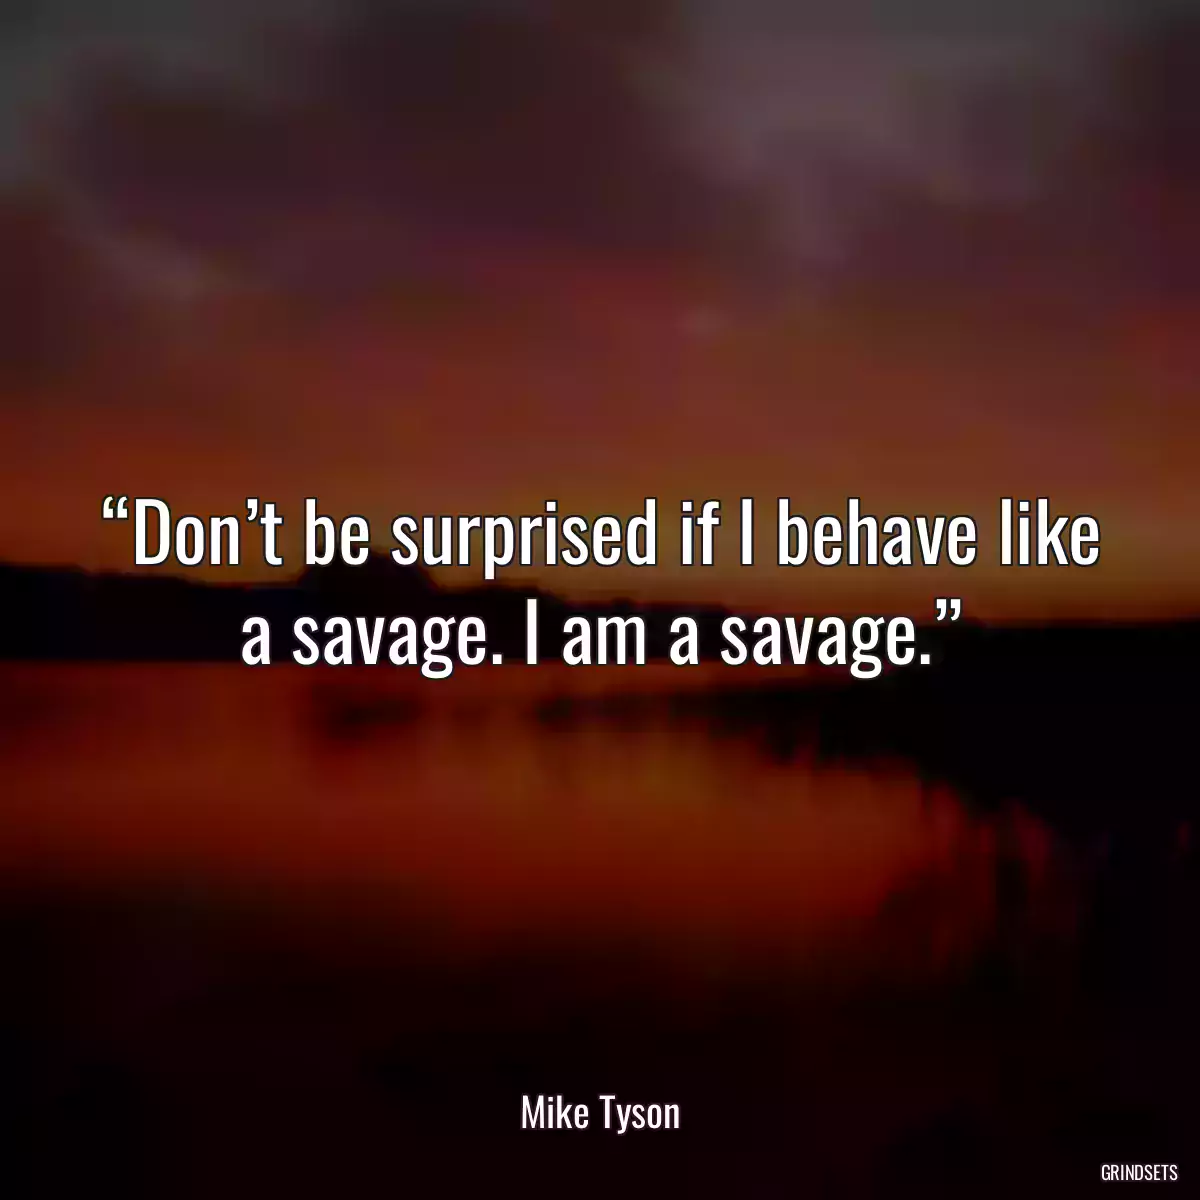 “Don’t be surprised if I behave like a savage. I am a savage.”